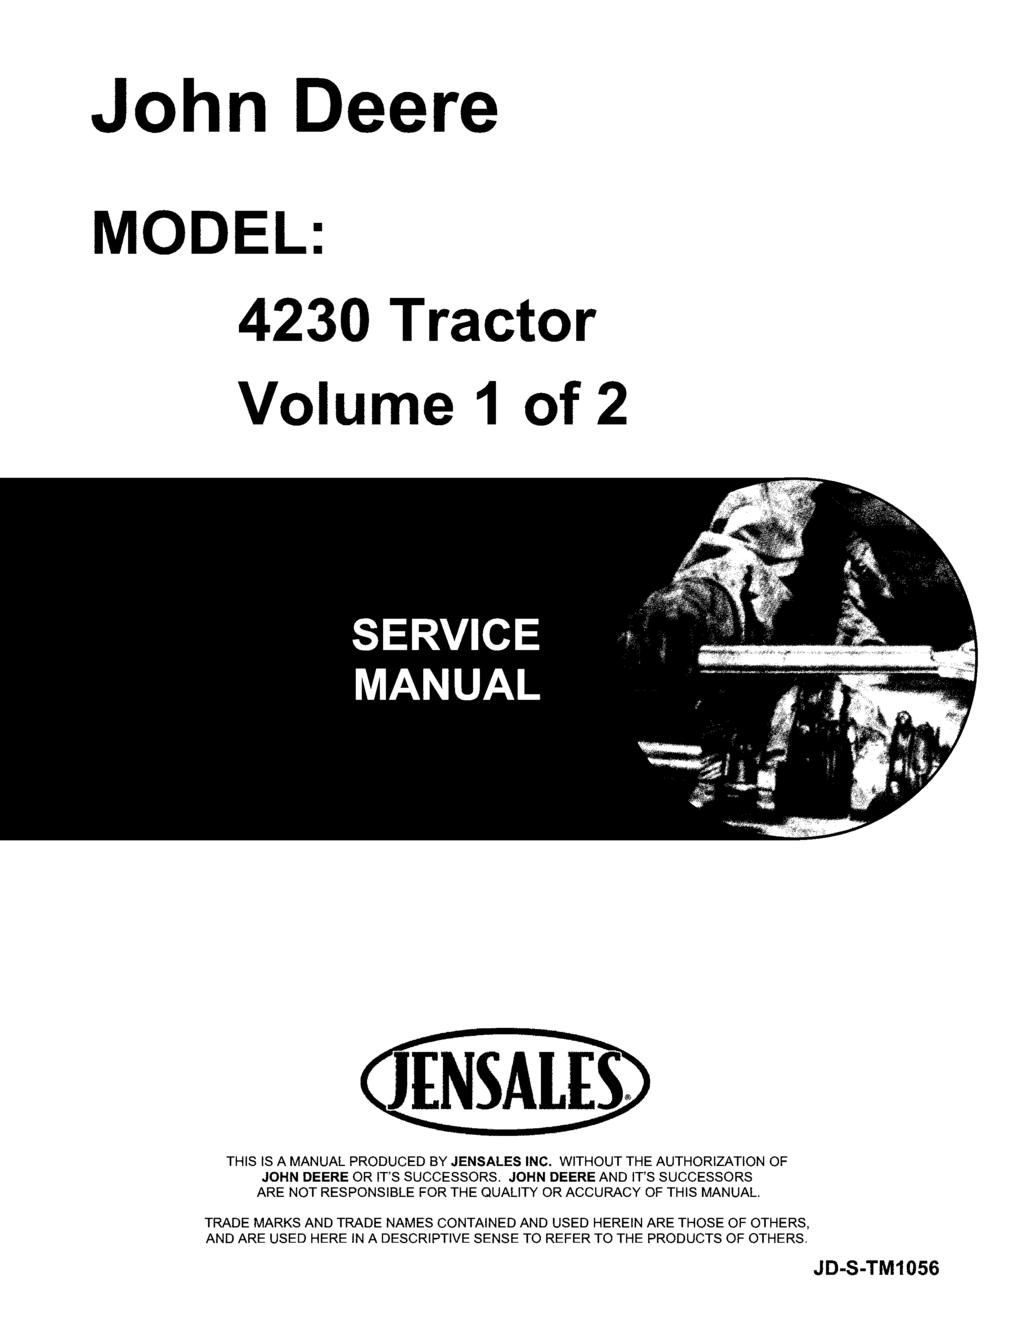 John Deere MODEL: 4230 Tractor Volume 1 of 2 THIS IS A MANUAL PRODUCED BY JENSALES INC. WITHOUT THE AUTHORIZATION OF JOHN DEERE OR IT'S SUCCESSORS.